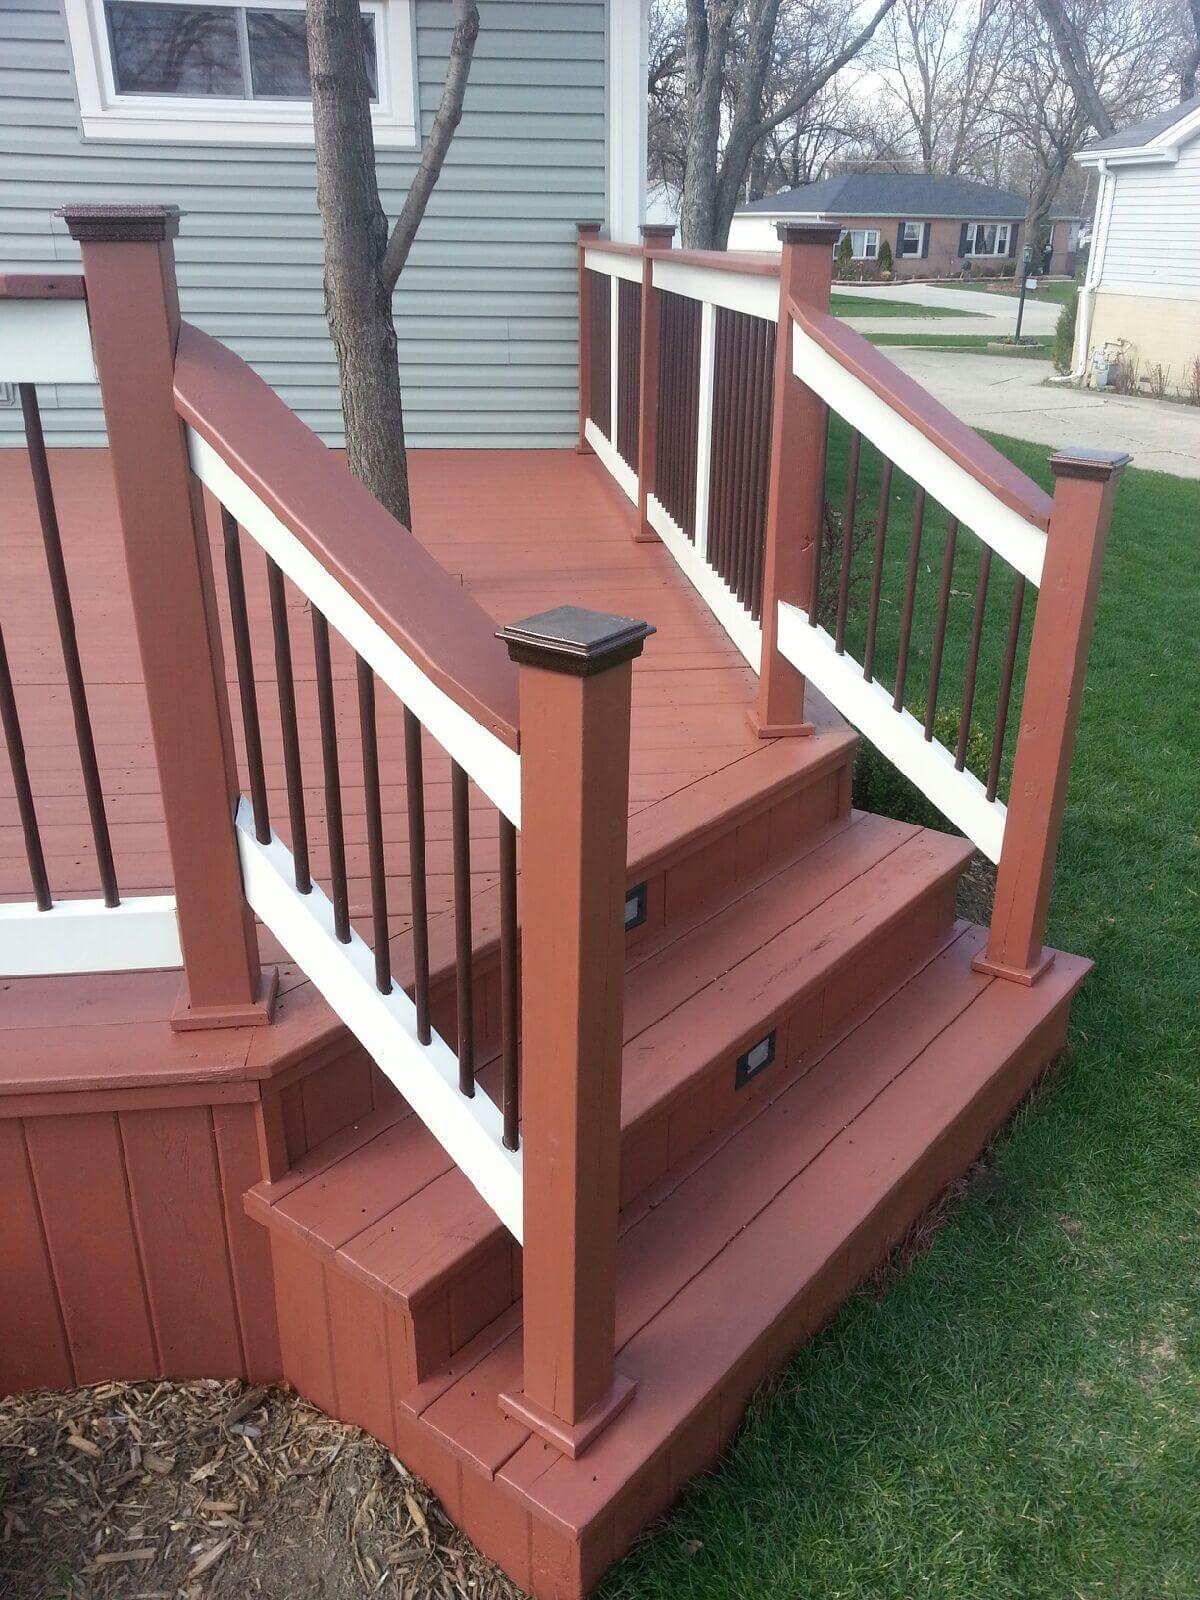 Repairs and maintenance for your deck, fence, and exterior wood staining. - Deck Staining Barrington - Deck Cleaning Services